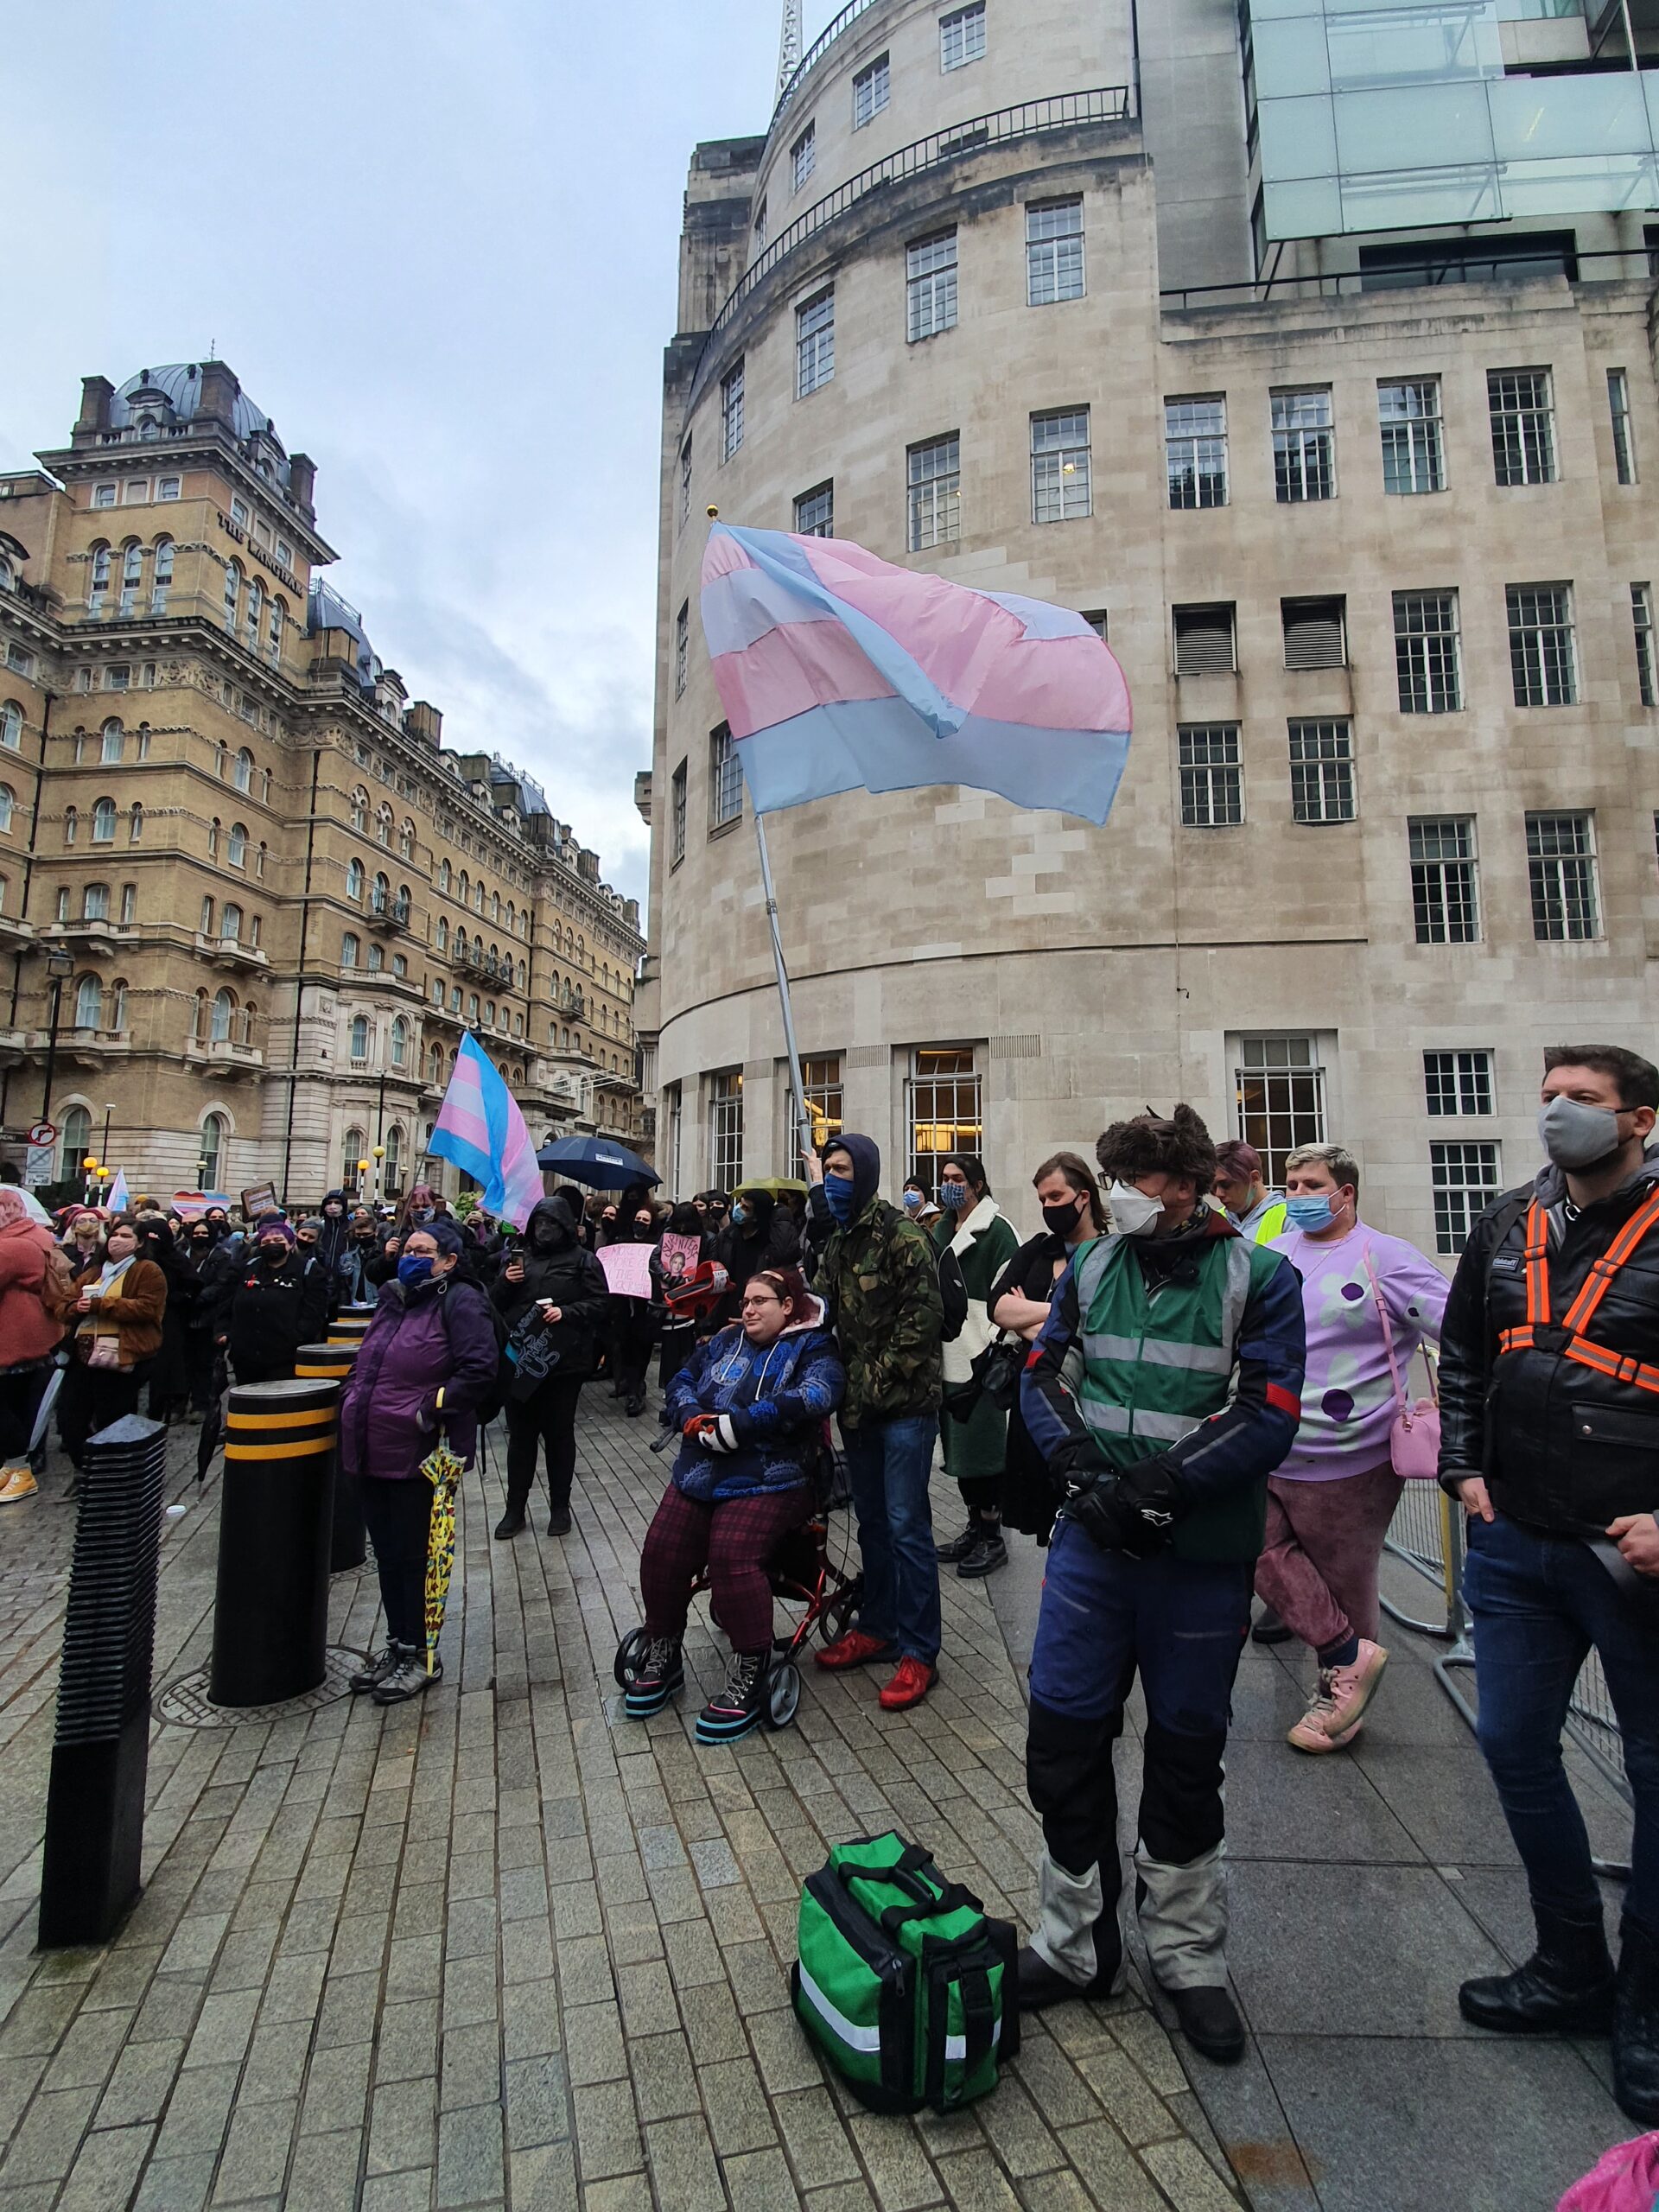 “Fuck the BBC” – Trans people protest the BBC in London (speeches and coverage round up)